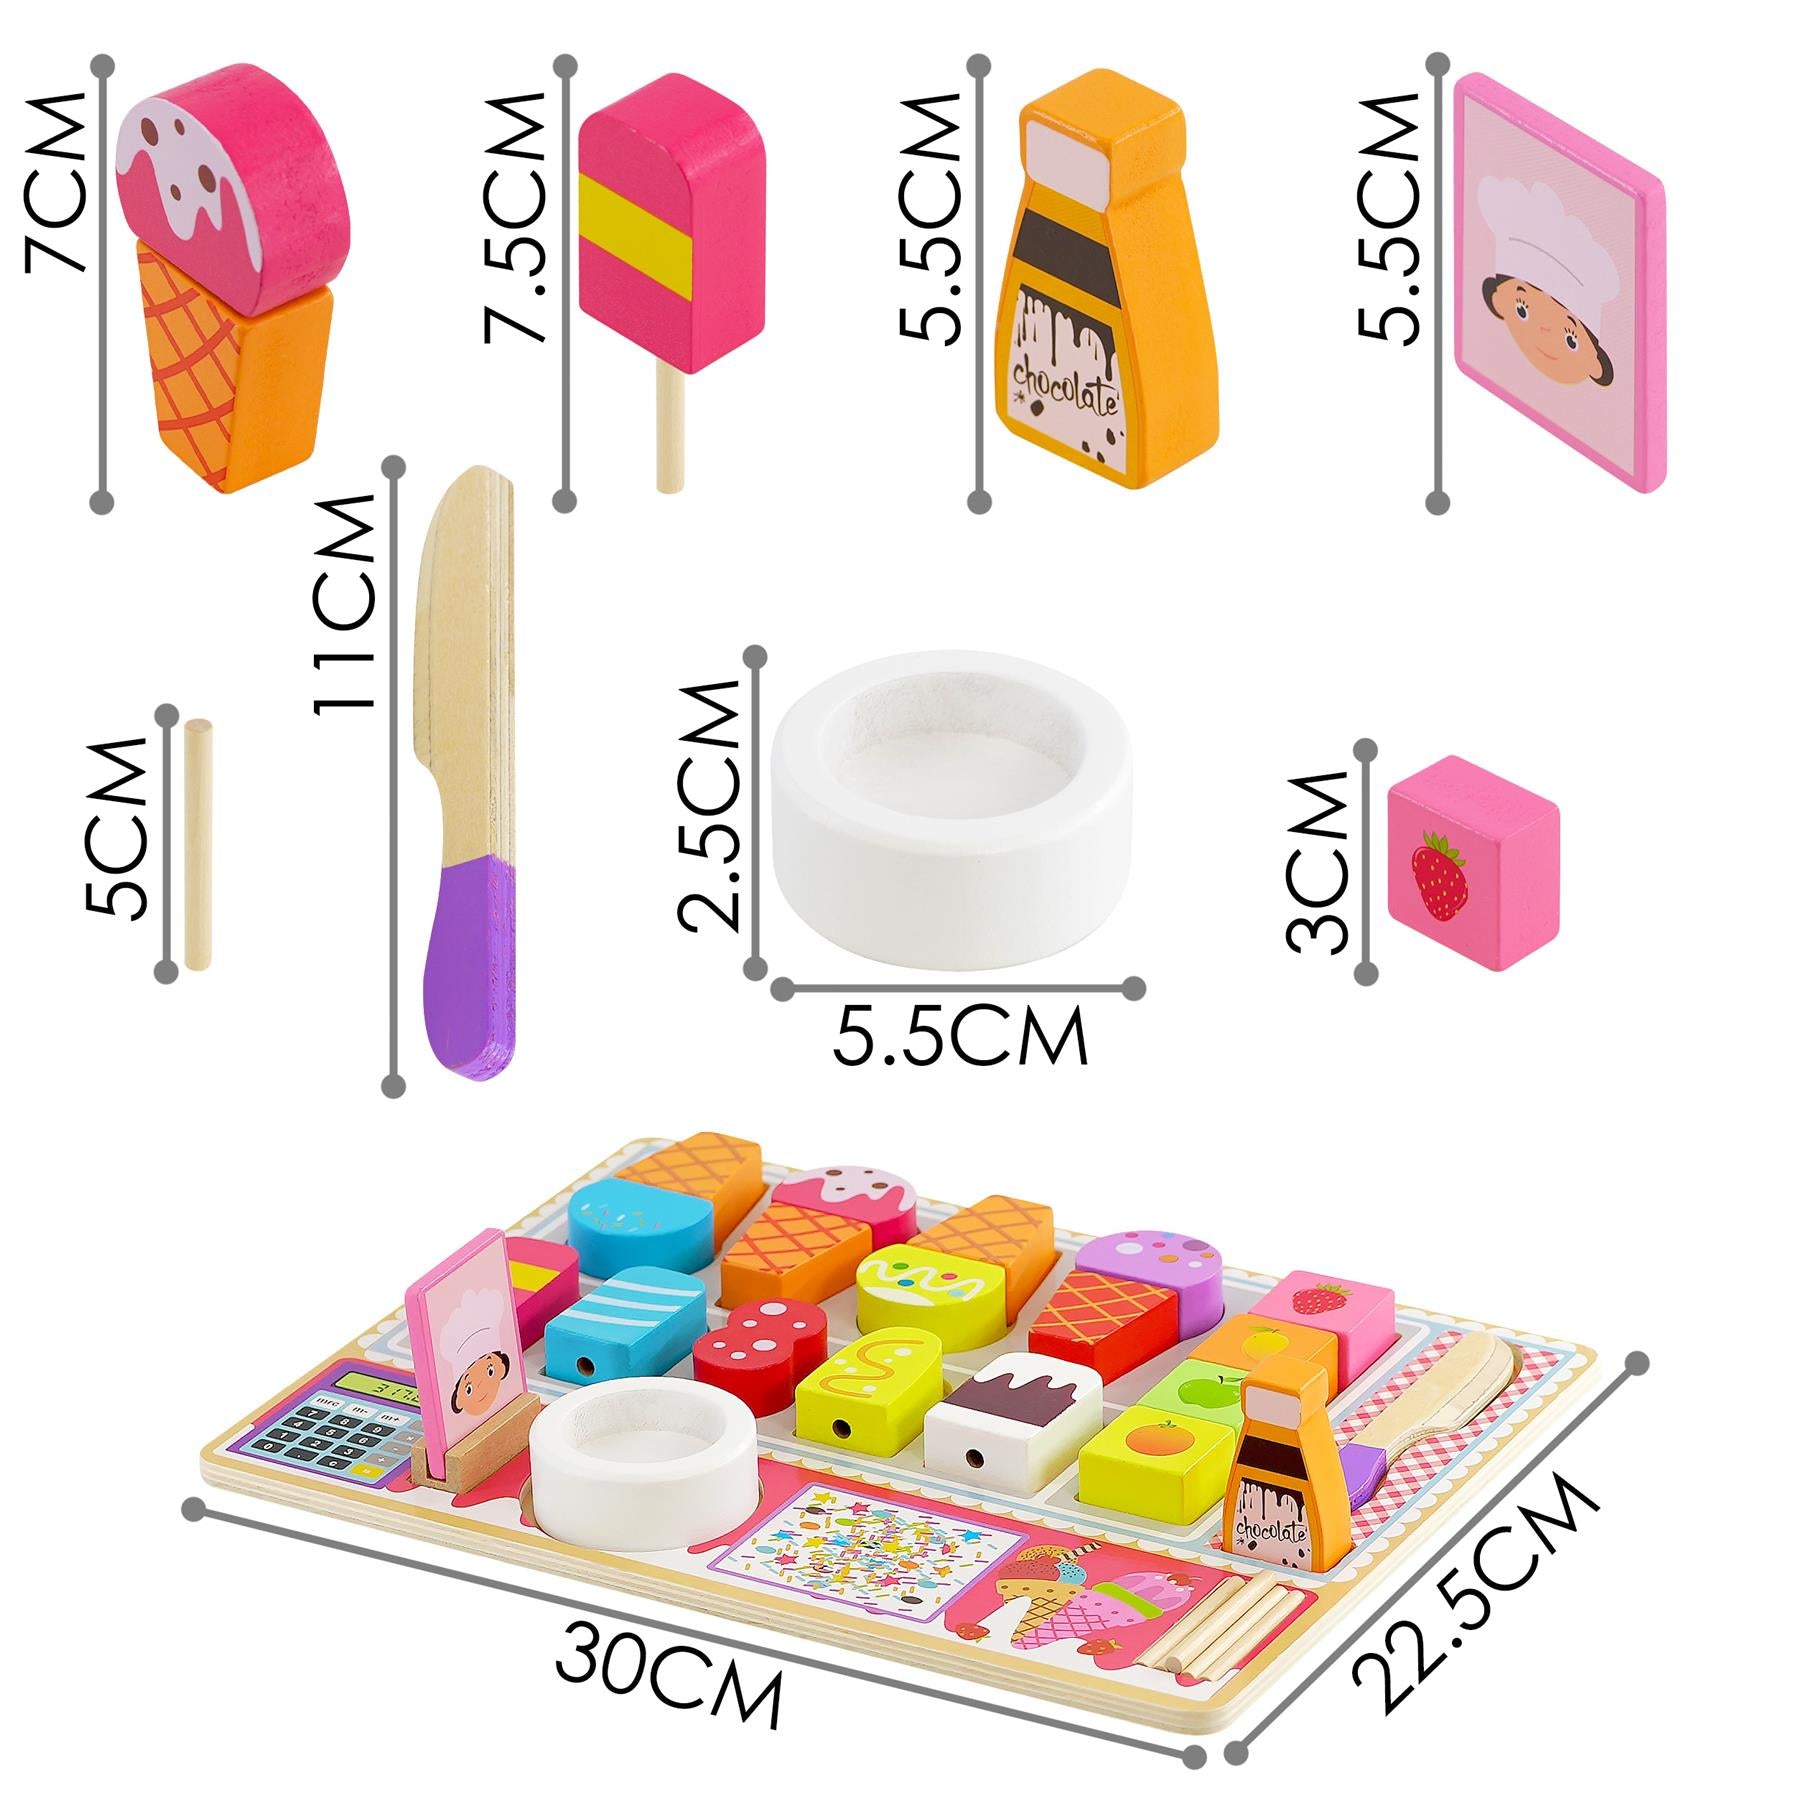 Kids Wooden Ice Cream Shop Set Role Play Toys by The Magic Toy Shop - The Magic Toy Shop